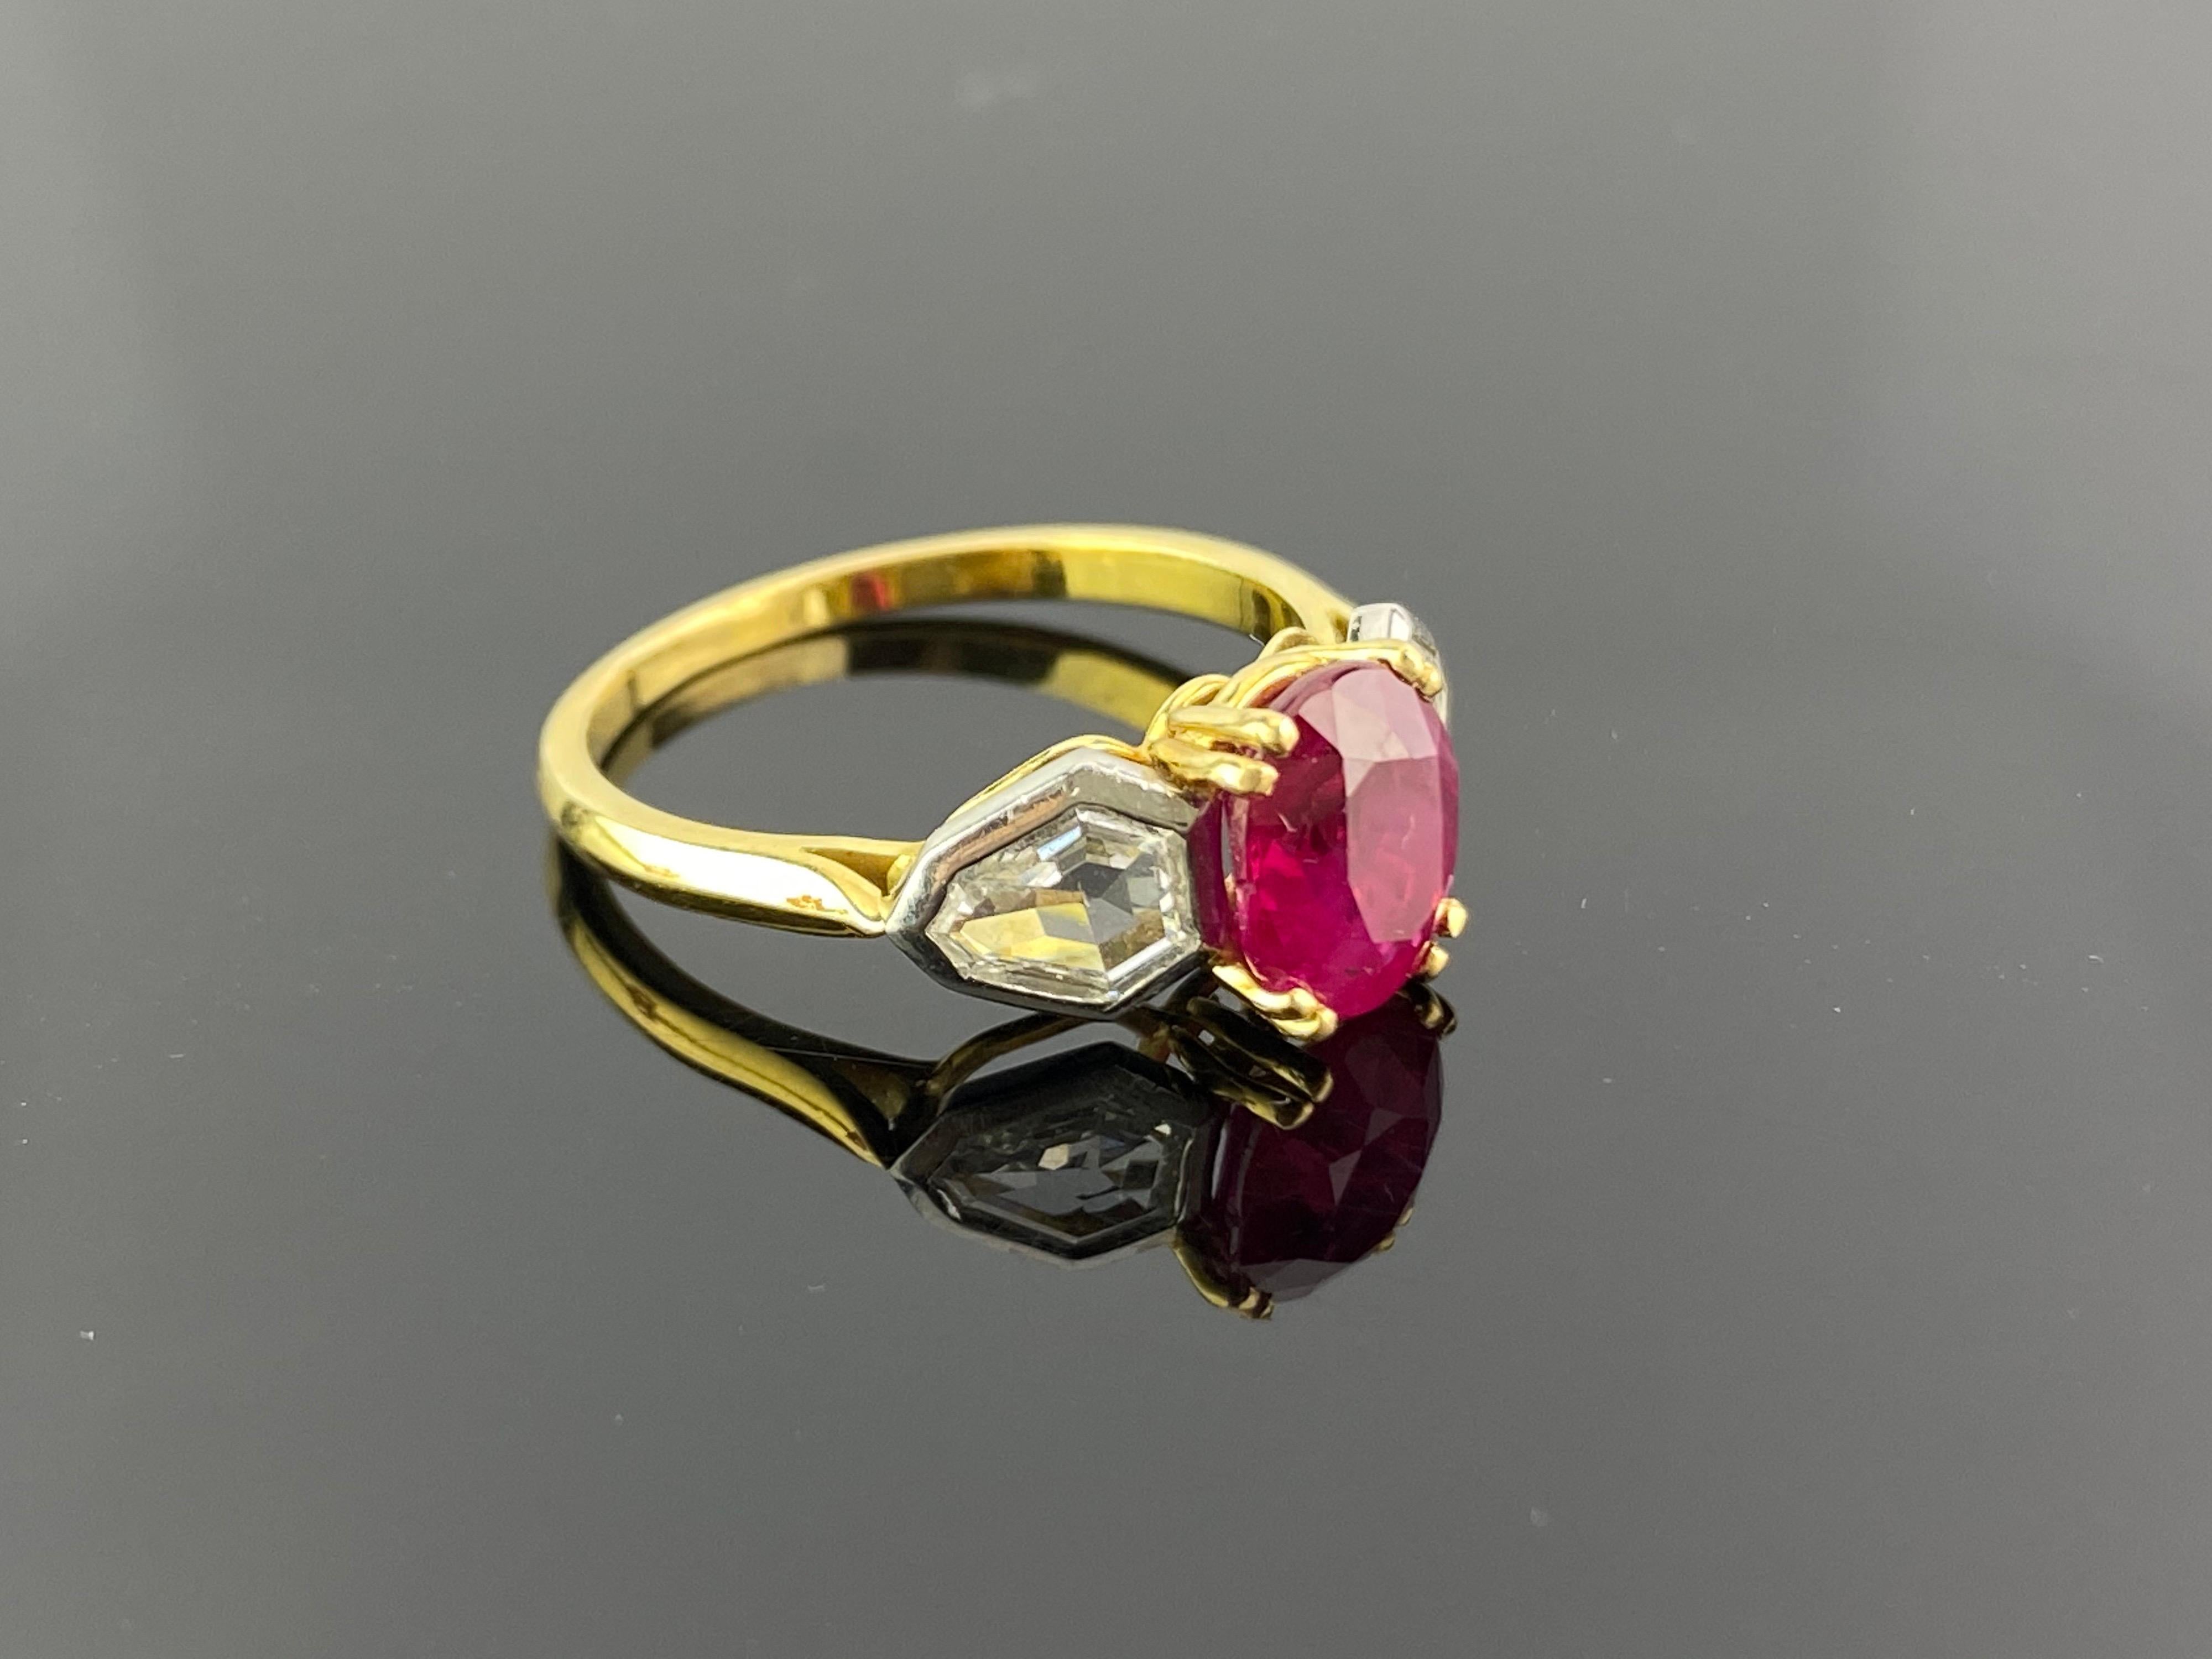 A beautiful 2.01 carat, pigeon blood oval Burmese Ruby and fancy cut Diamond three-stone engagement ring.  The Diamonds are colorless and VVS quality, and the stones are set in solid 18K Yellow and White Gold. The ring is currently sized at US 6,